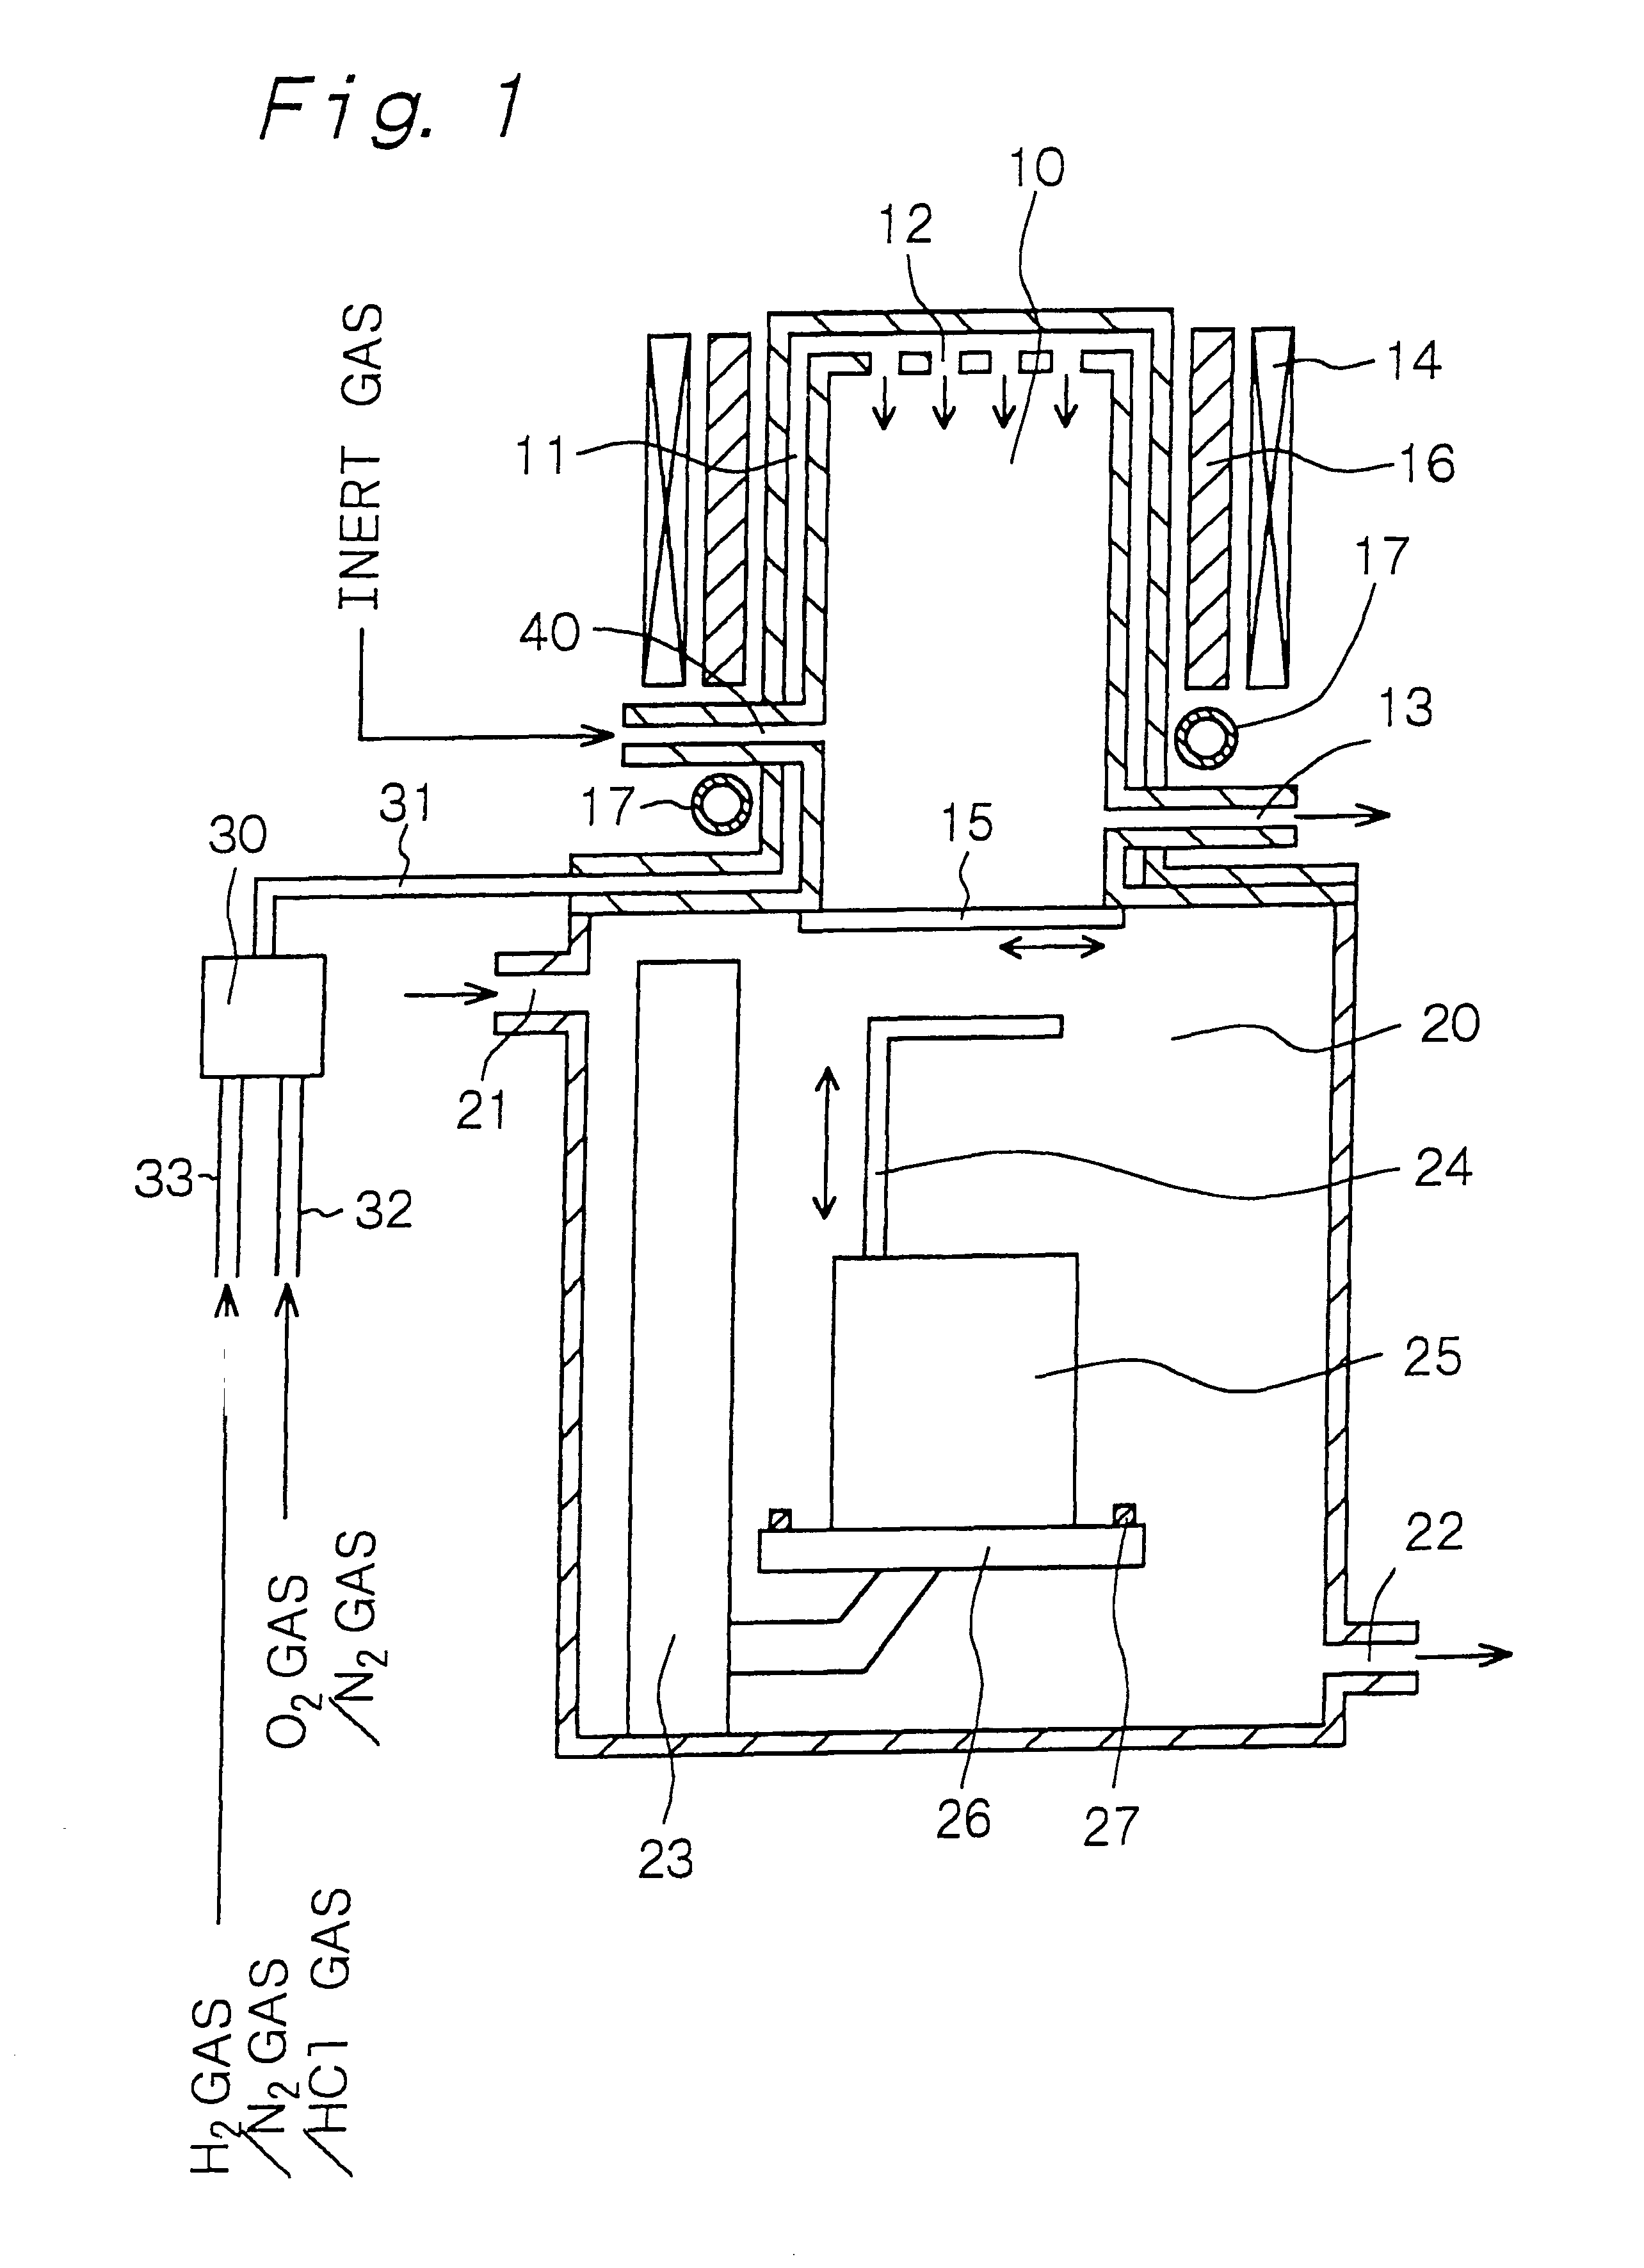 Apparatus for forming silicon oxide film and method of forming silicon oxide film